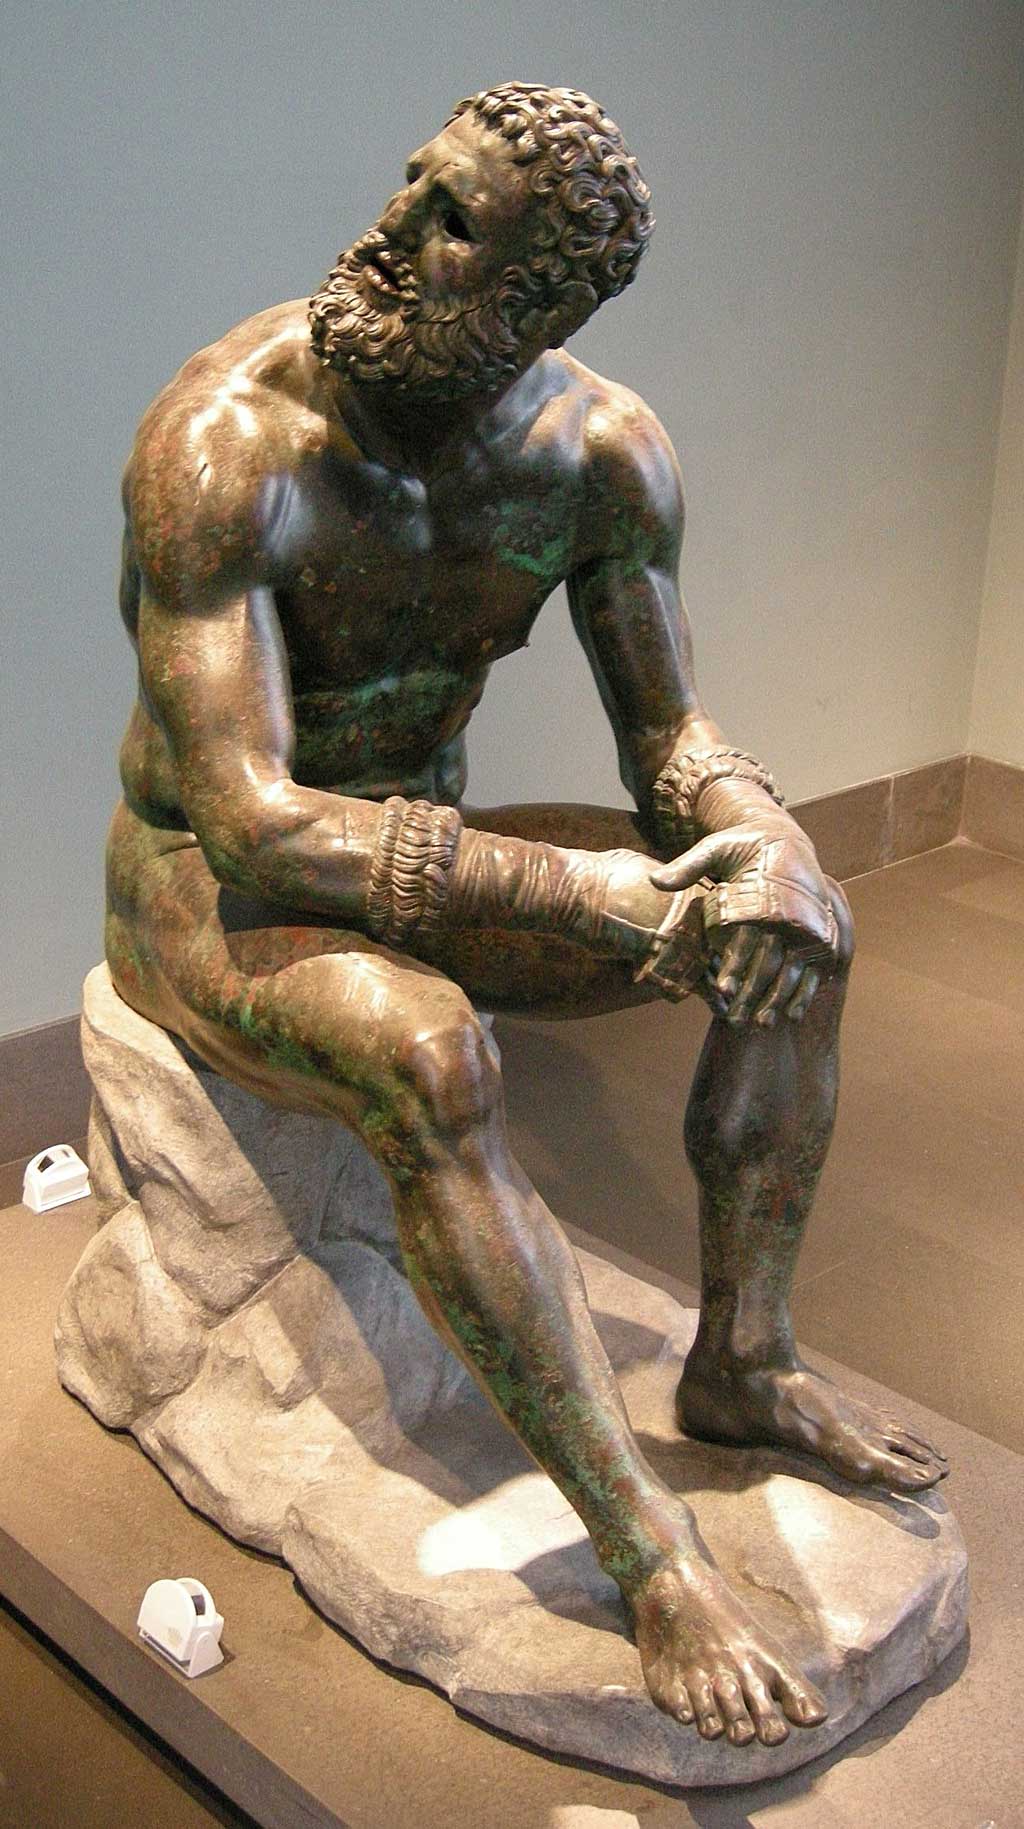 Image of the Boxer statue. The bearded man sits on a stone, looking upwards while wearing the leather gloves still strapped around both hands.